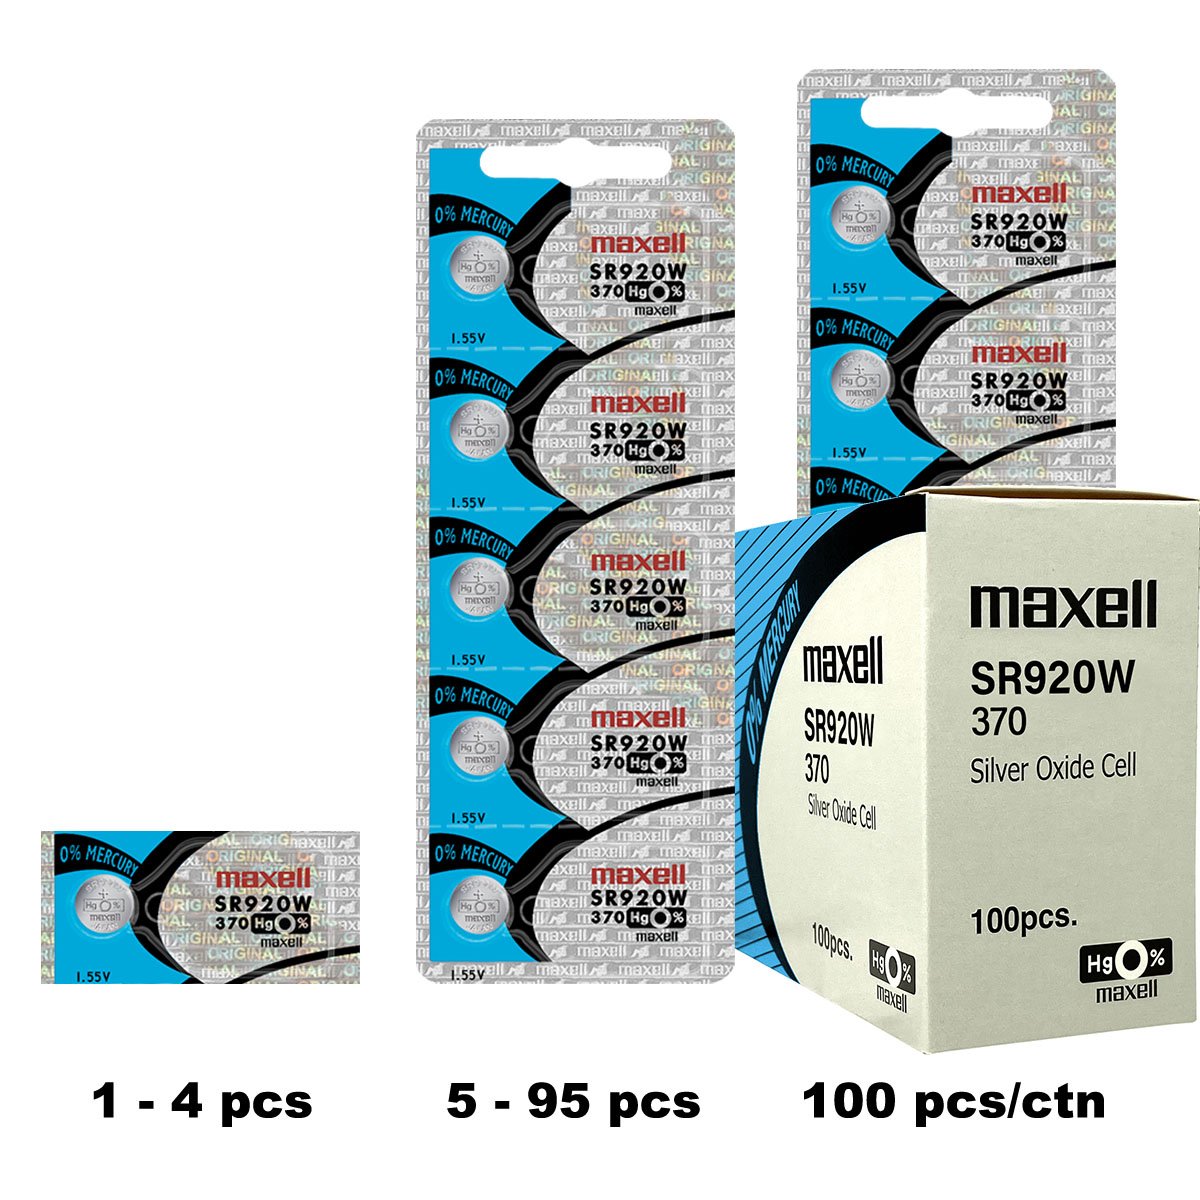 2 x MAXELL SR621SW 364 D364 602 1.55v Silver Oxide Button Cell Watch  Battery - Official Genuine Maxell